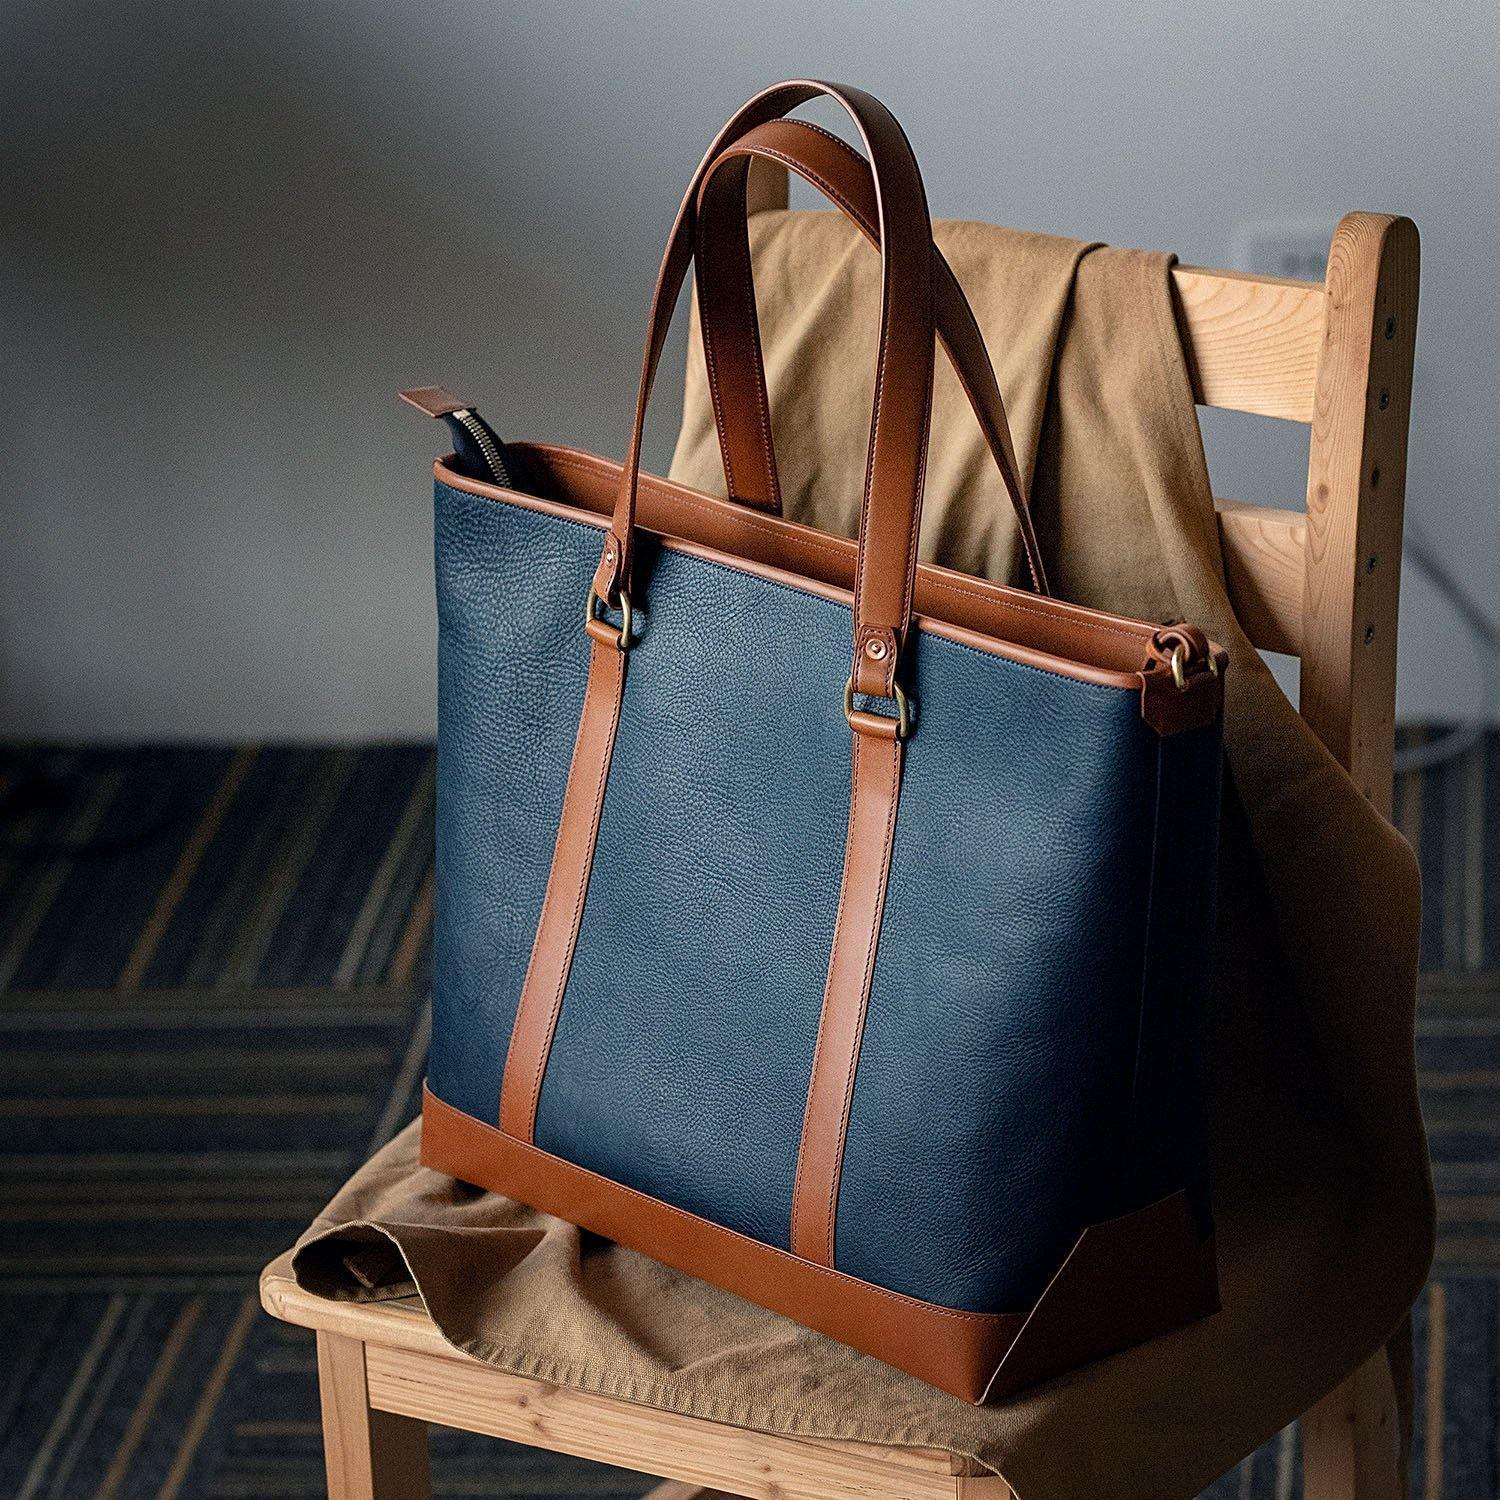 The Morris Leather Tote - Handmade Leather Tote